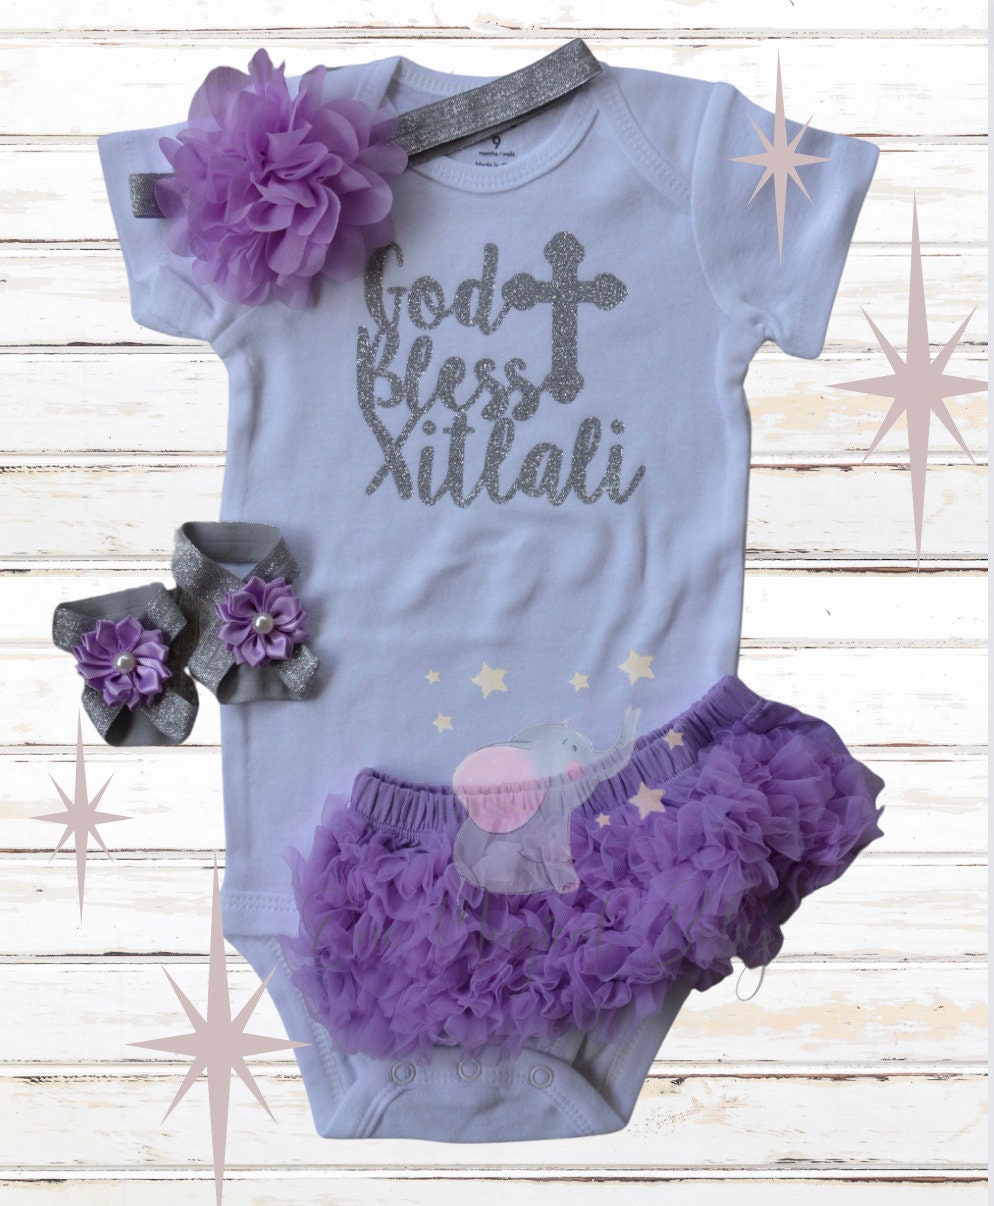 Personalized Lavender Baptism after party baby girl outfit, God bless personalized glitter bodysuit outfit baby girl baptism lavender.